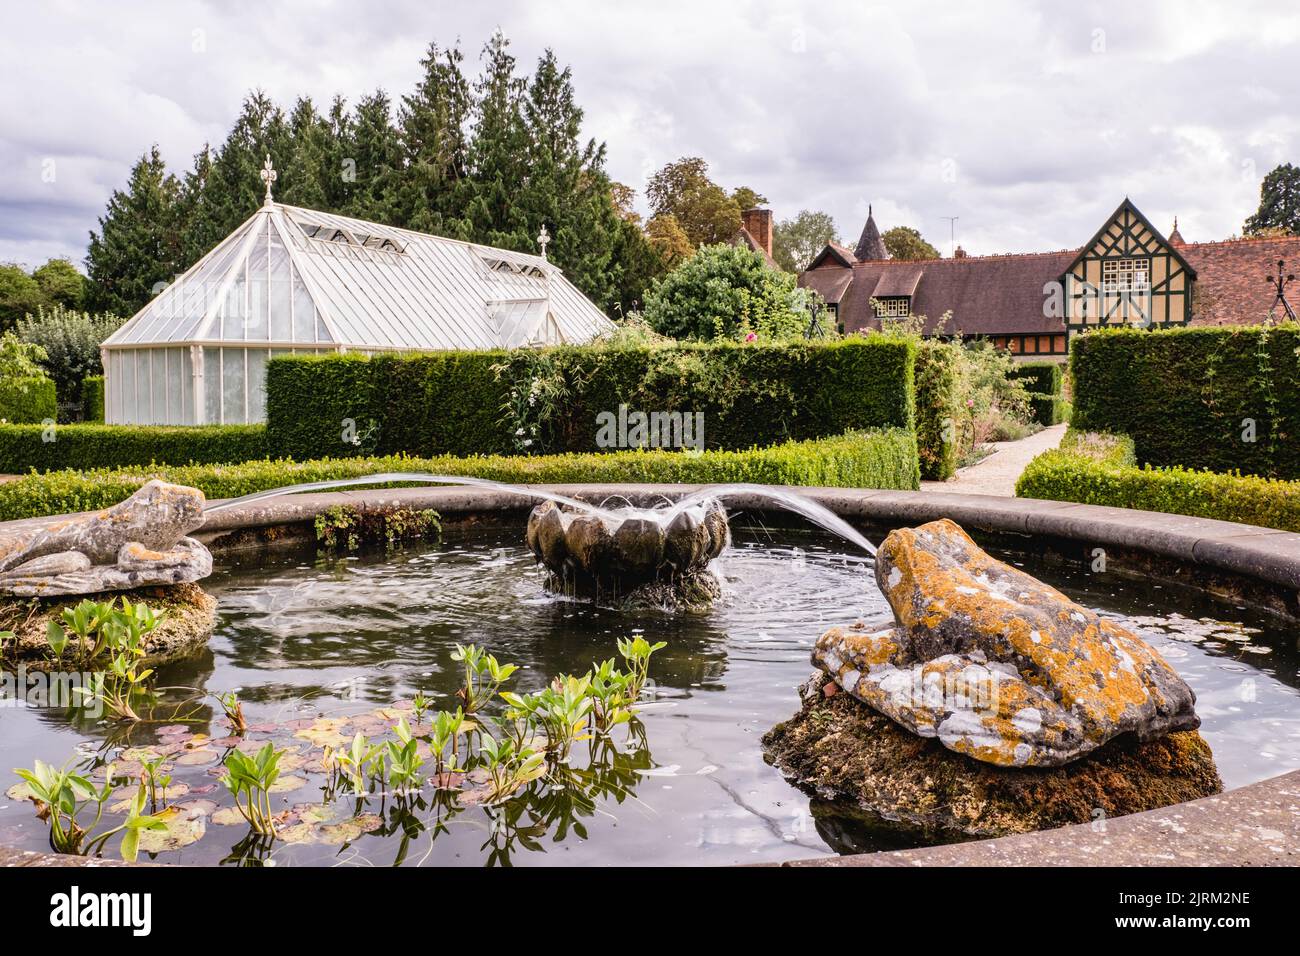 The ornamental fountain and green houses in the background at Eythrope Gardens on the Waddesdon Manor estate. Stock Photo